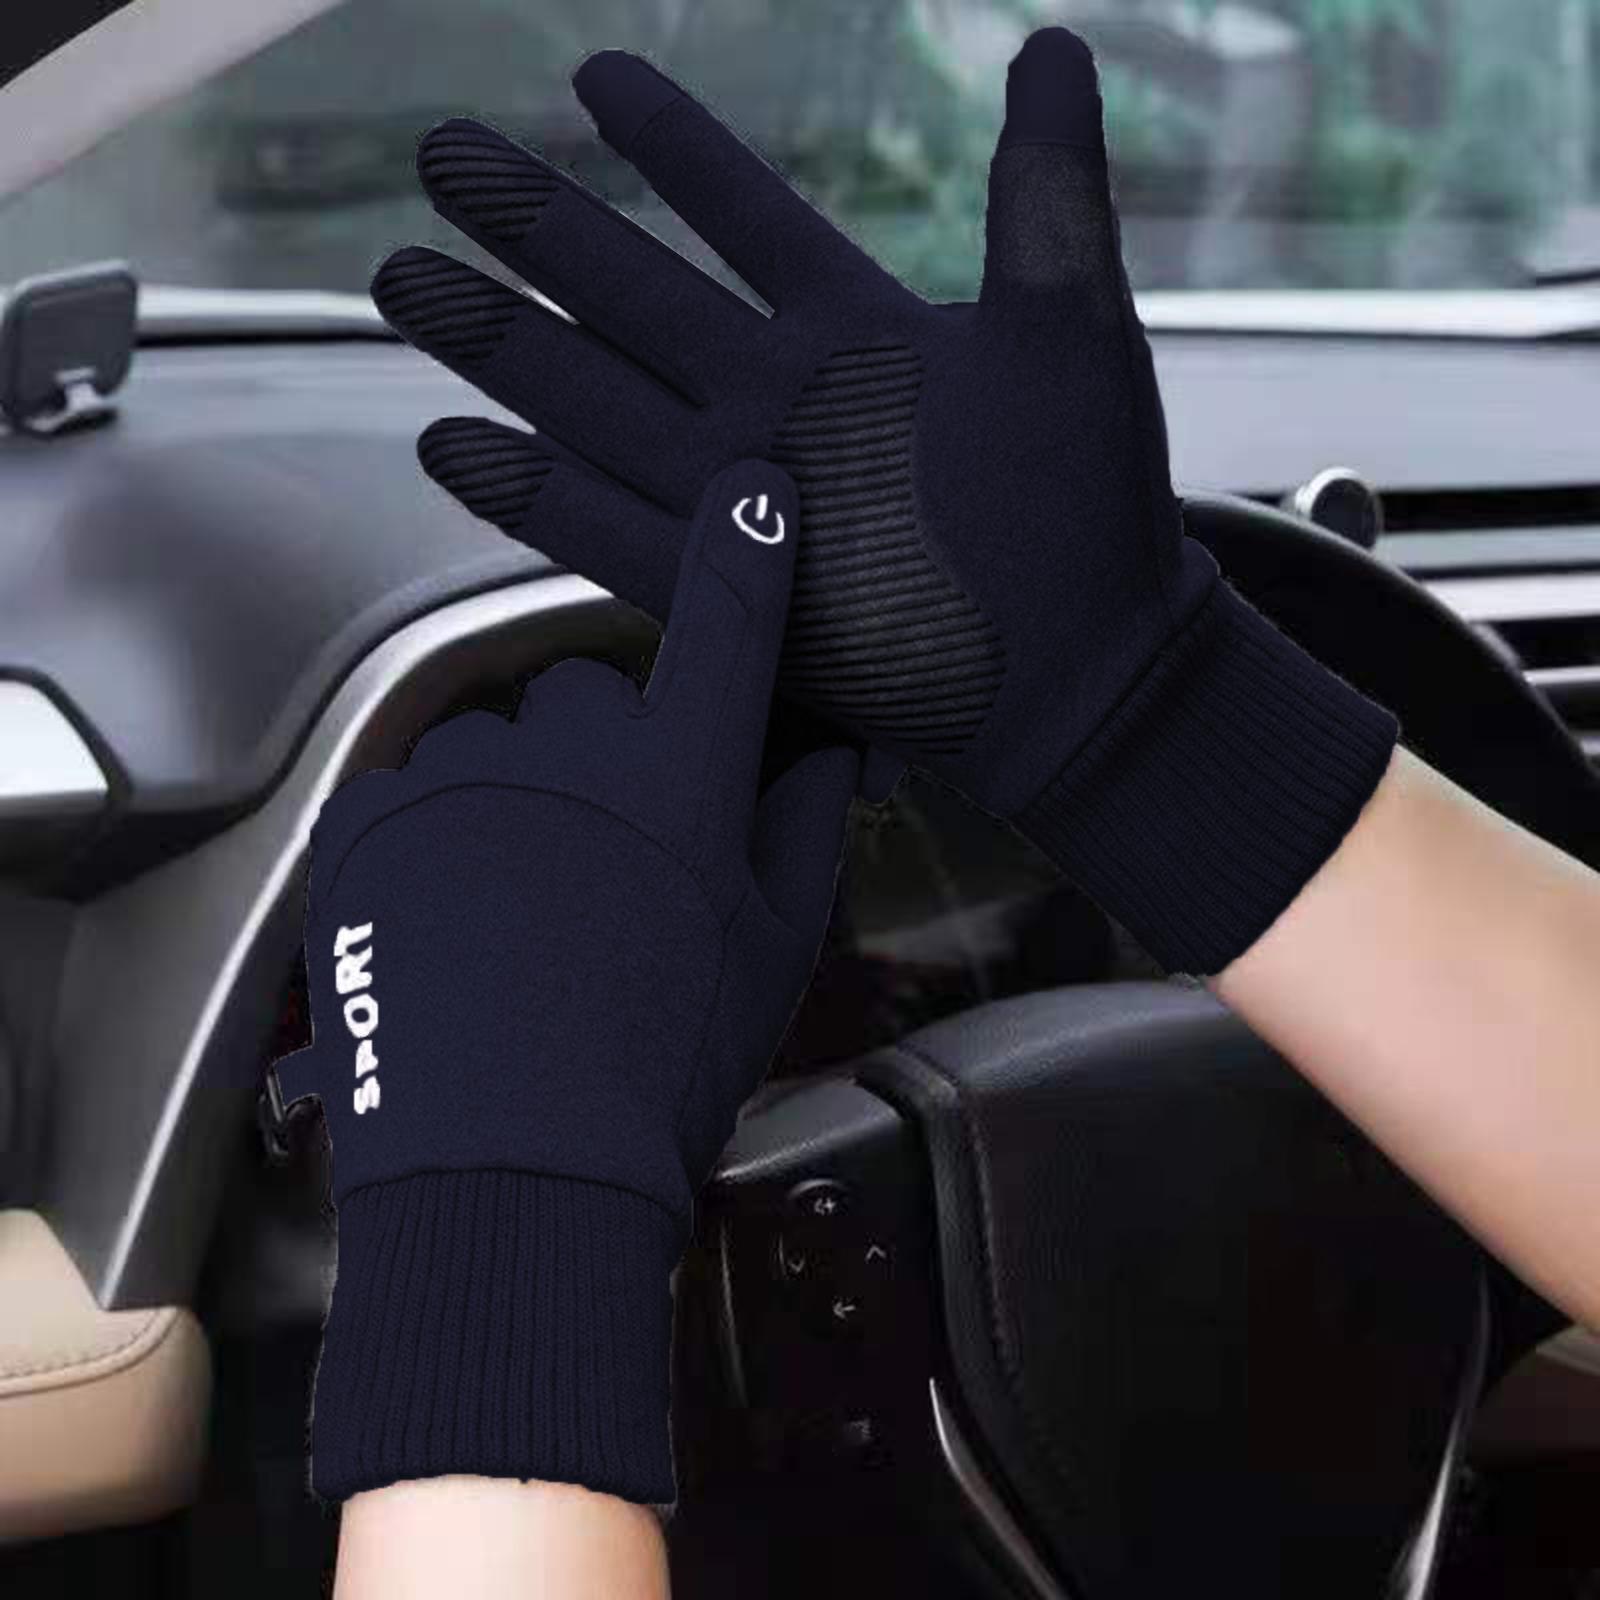 Thermal Gloves Commuting Winter Gloves for Driving Outdoor Sports Riding Dark Blue XL